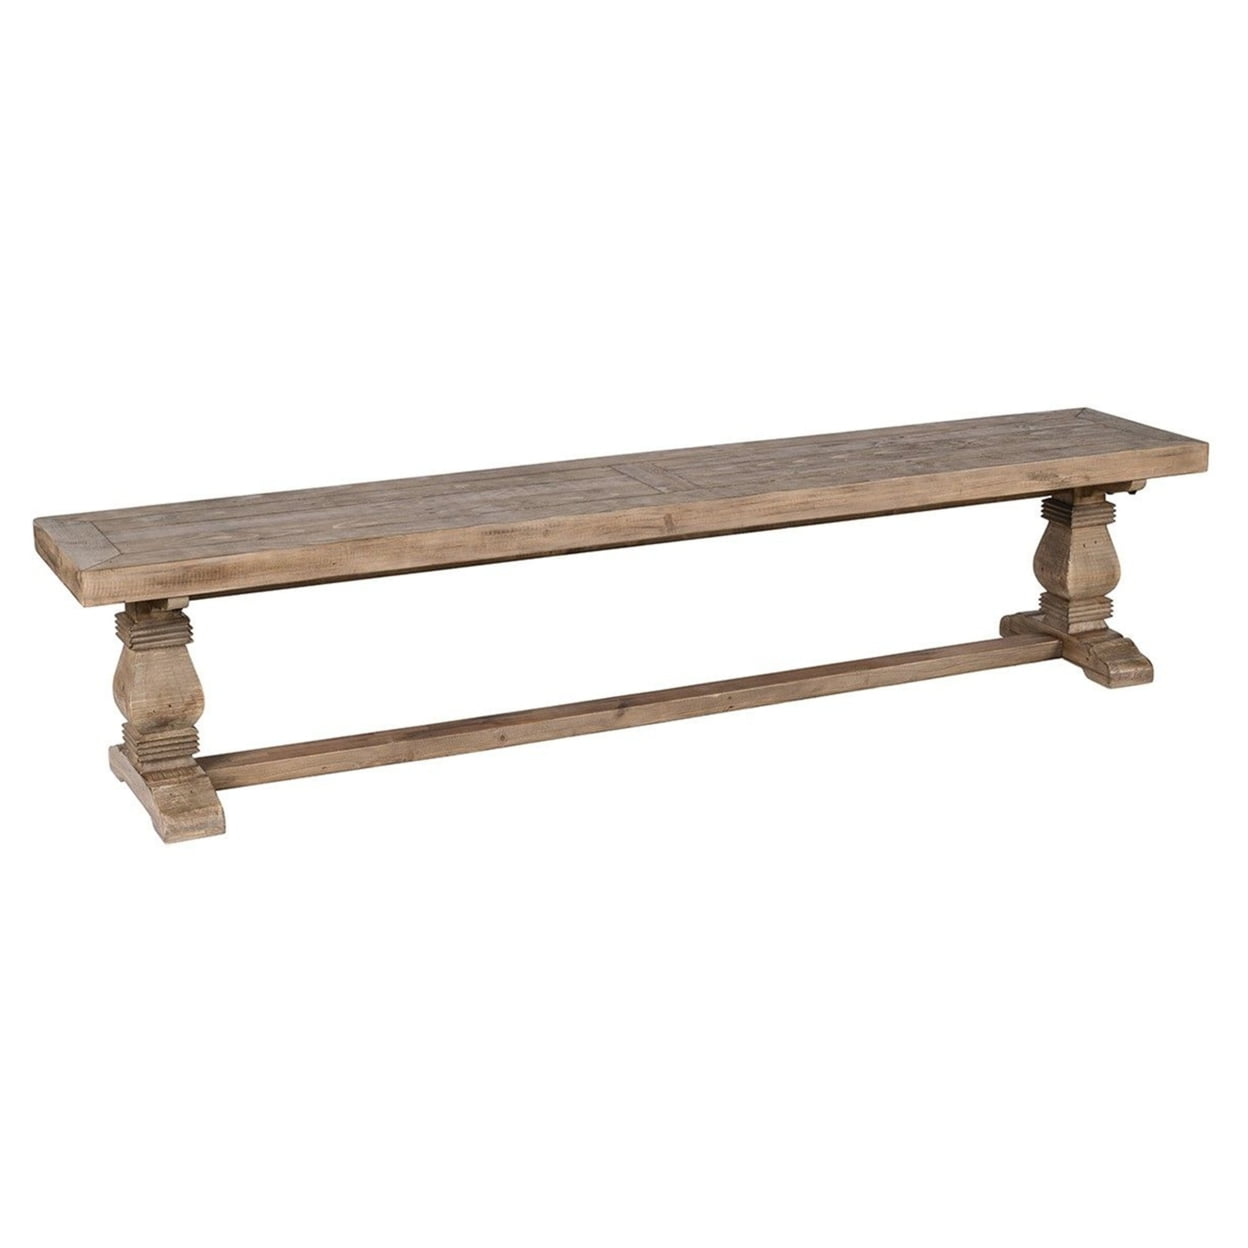 Bm210353 Rectangular Reclaimed Wood Bench With Trestle Base - Weathered Brown - 18 X 83 X 16 In.